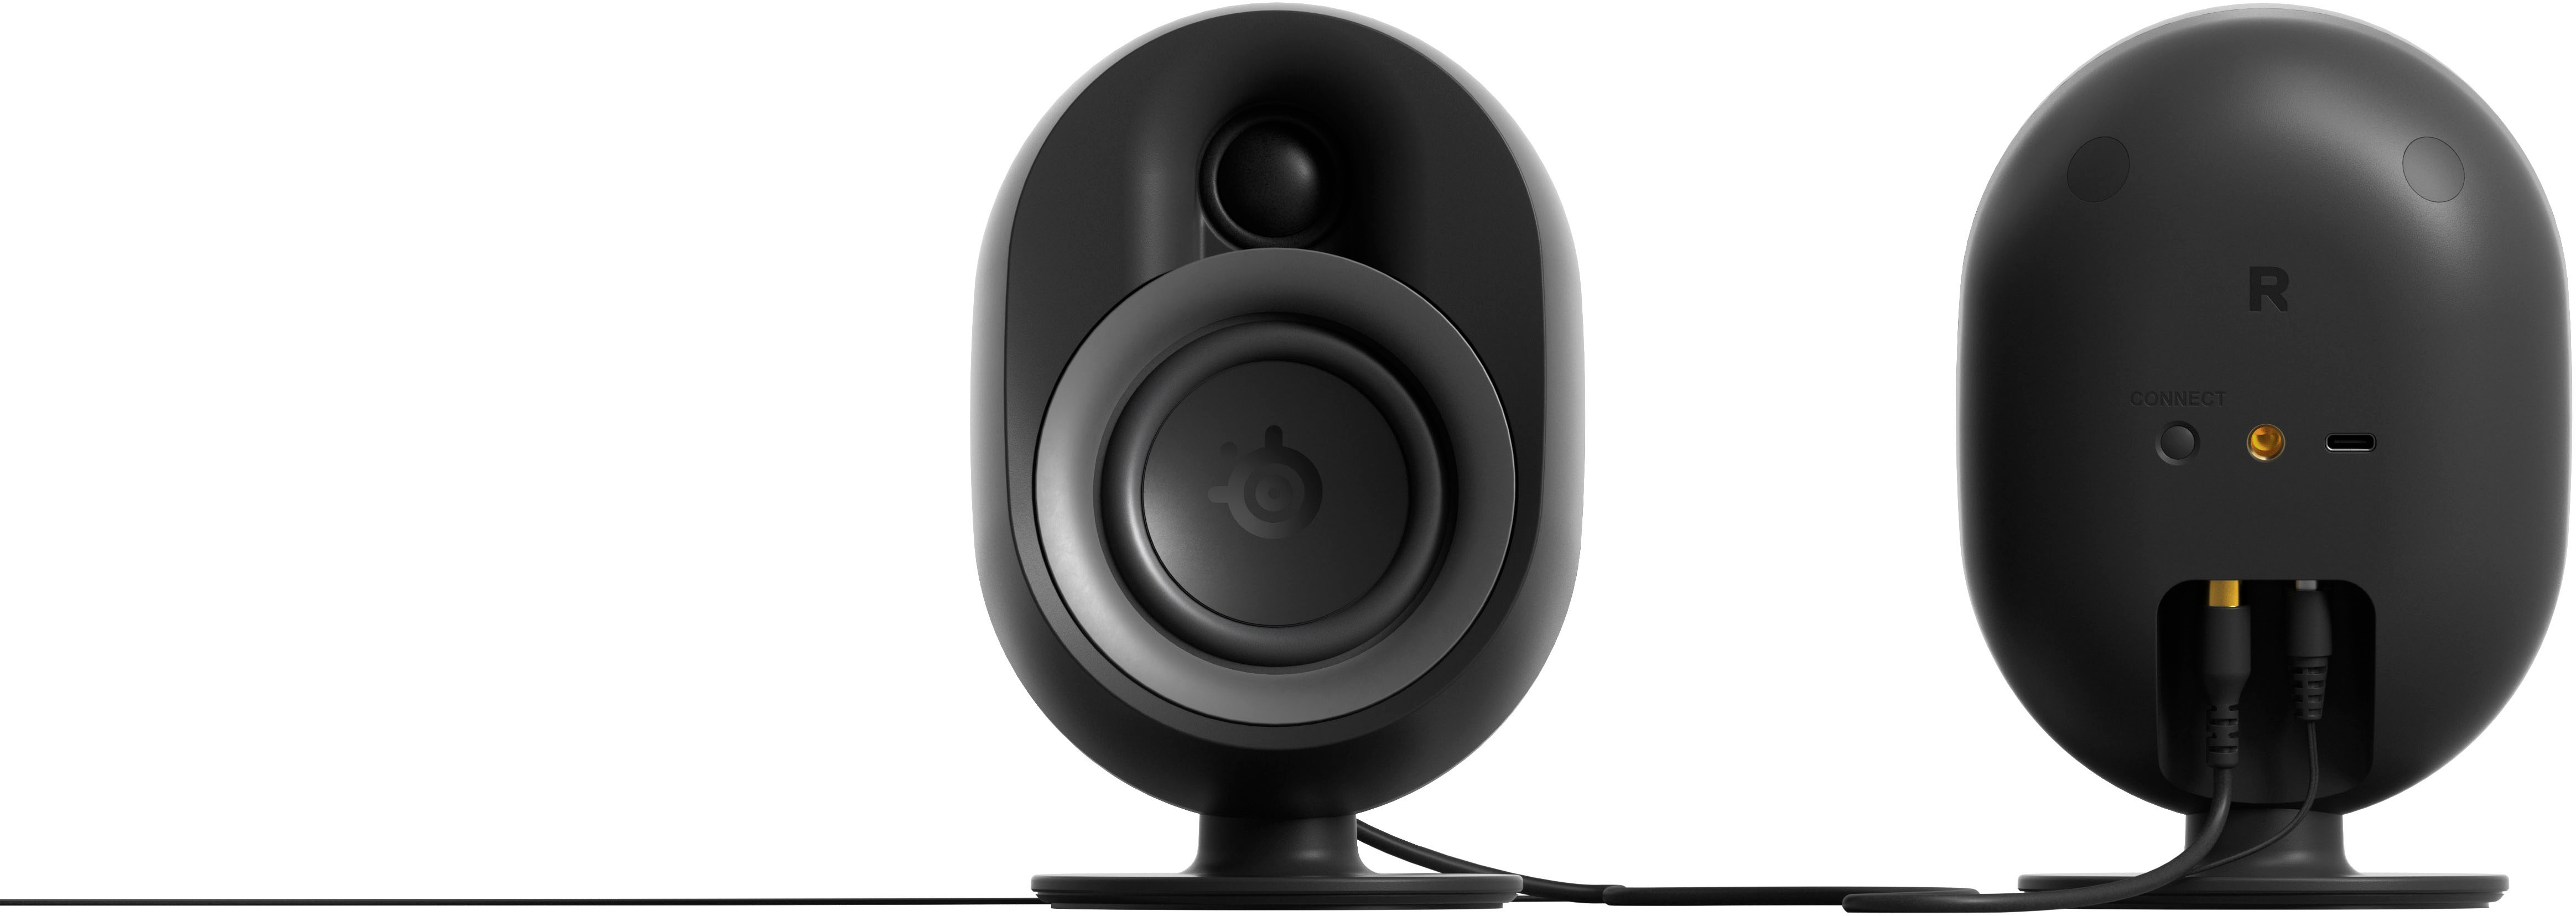 Left View: SteelSeries - Arena 9 5.1 Bluetooth Gaming Speakers with RGB Lighting (6 Piece) - Black